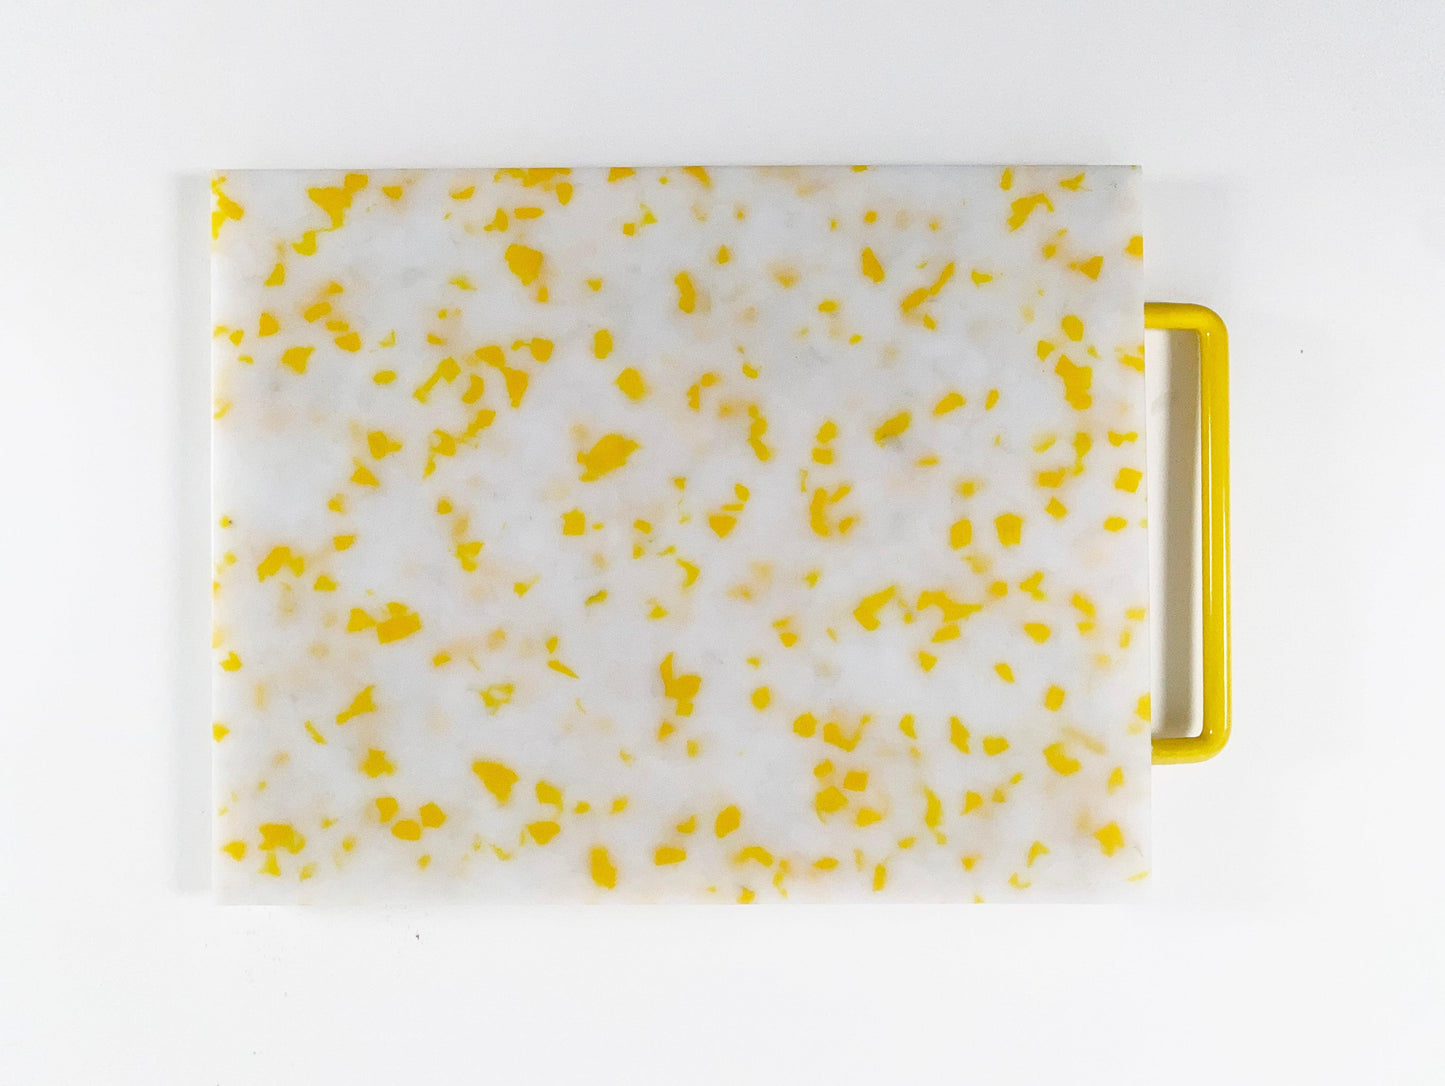 Mostly white cutting board with yellow confetti throughout, handle is yellow